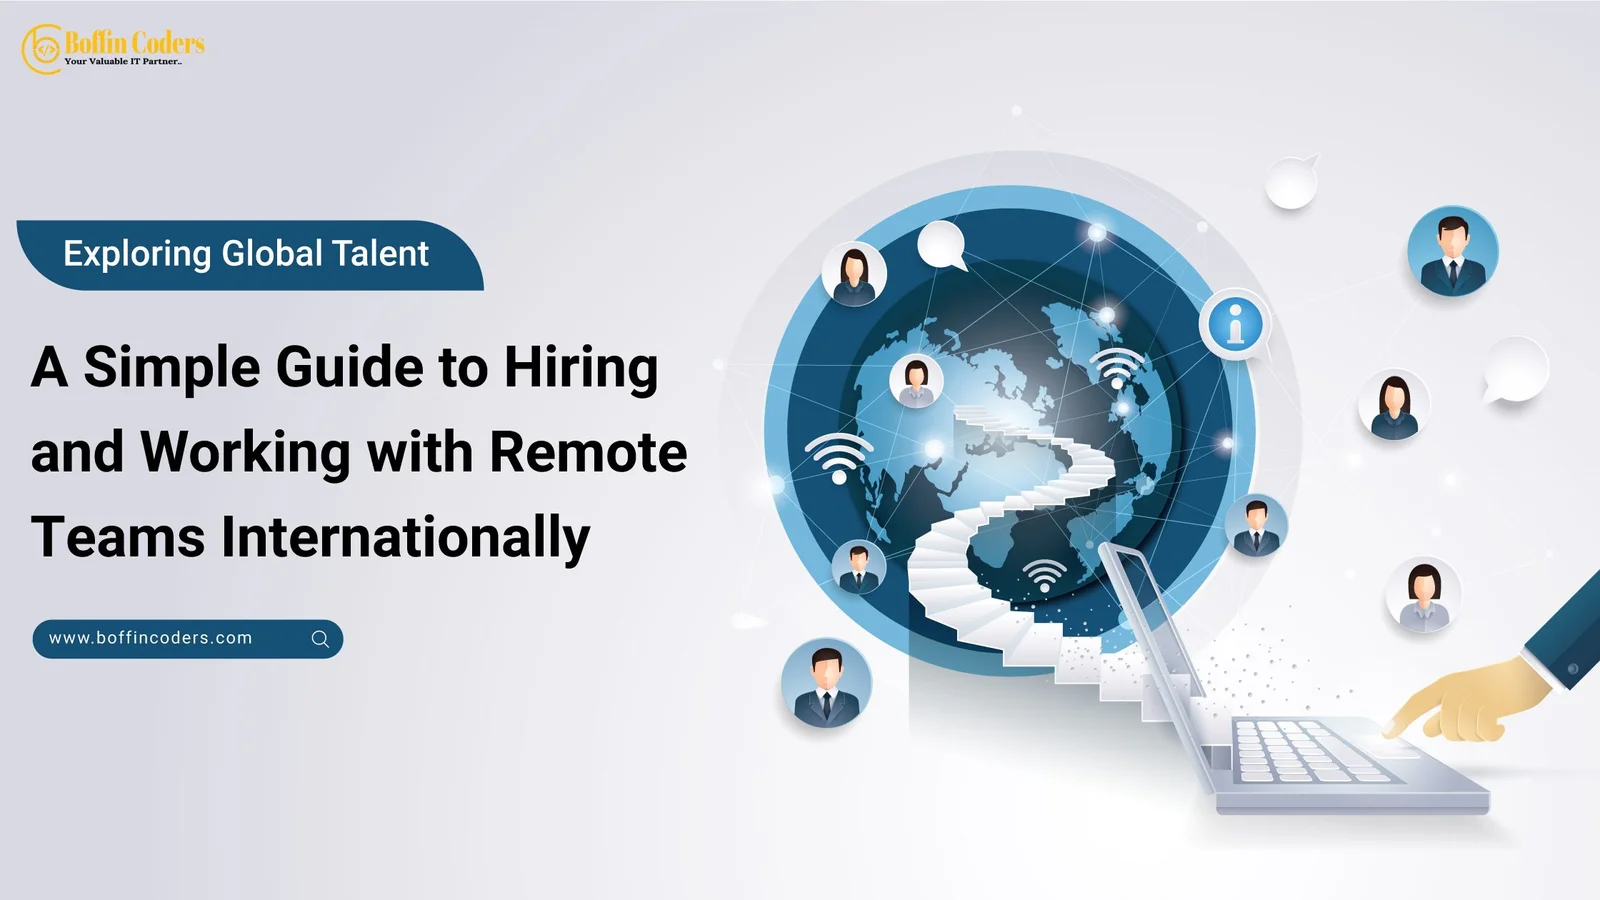 Exploring-Global-Talent-A-Simple-Guide-to-Hiring-and-Working-with-Remote-Teams-Internationally